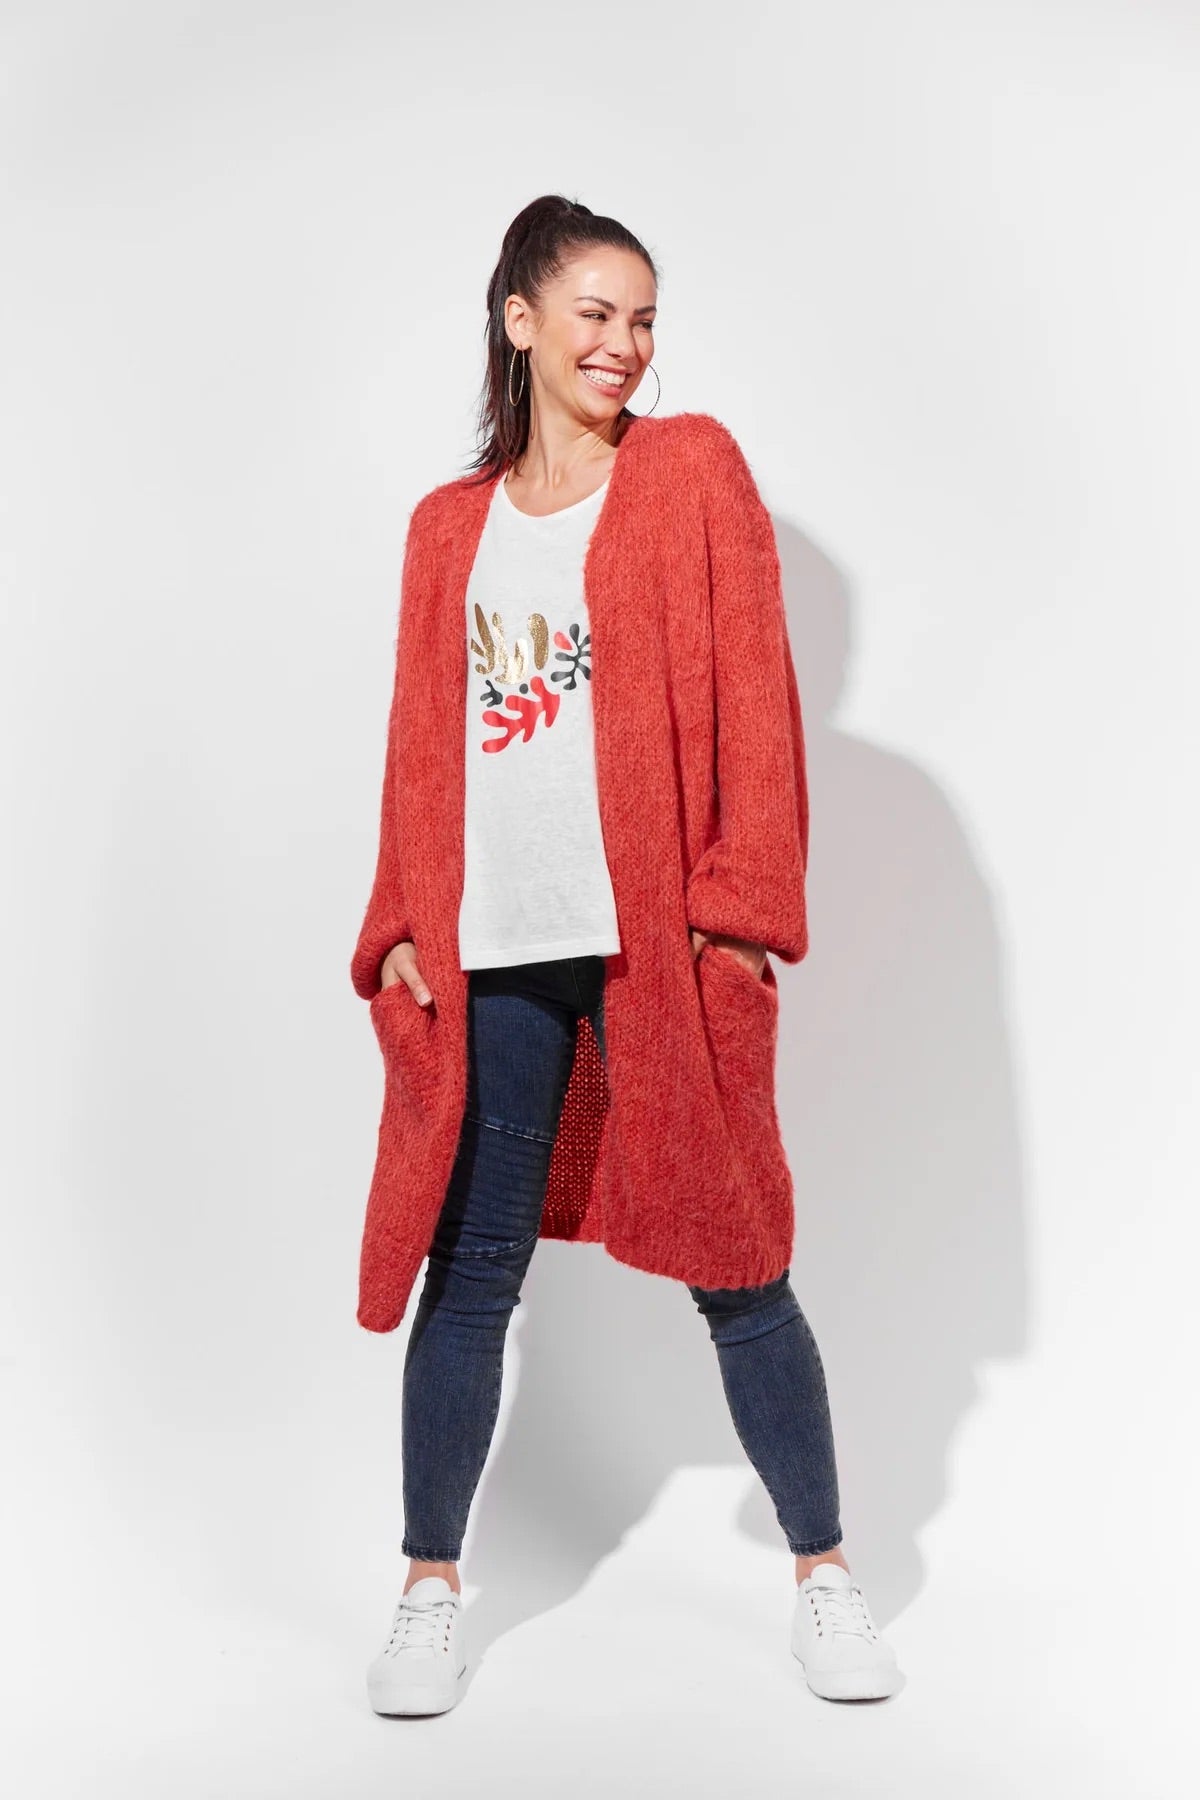 Haven Cannes Cardigan in Poppy (One Size)